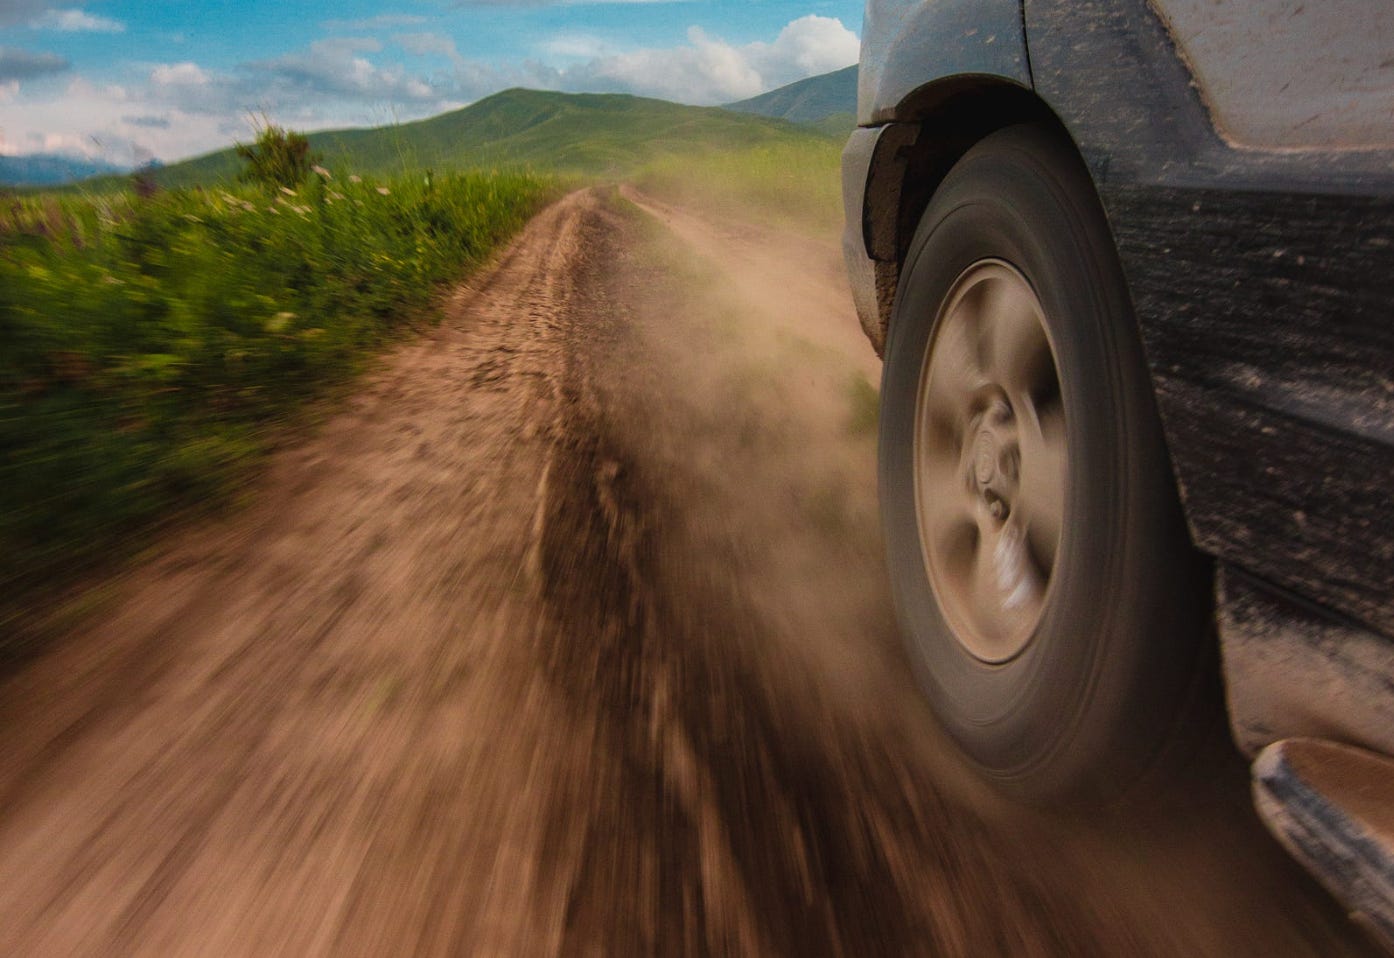 Photograph of the front wheel of a car going at speed down a dirt track. There's mud on the underside of the car. The sky is blue, and there are green hills in the background and a grassy meadow each side of the dirt road.